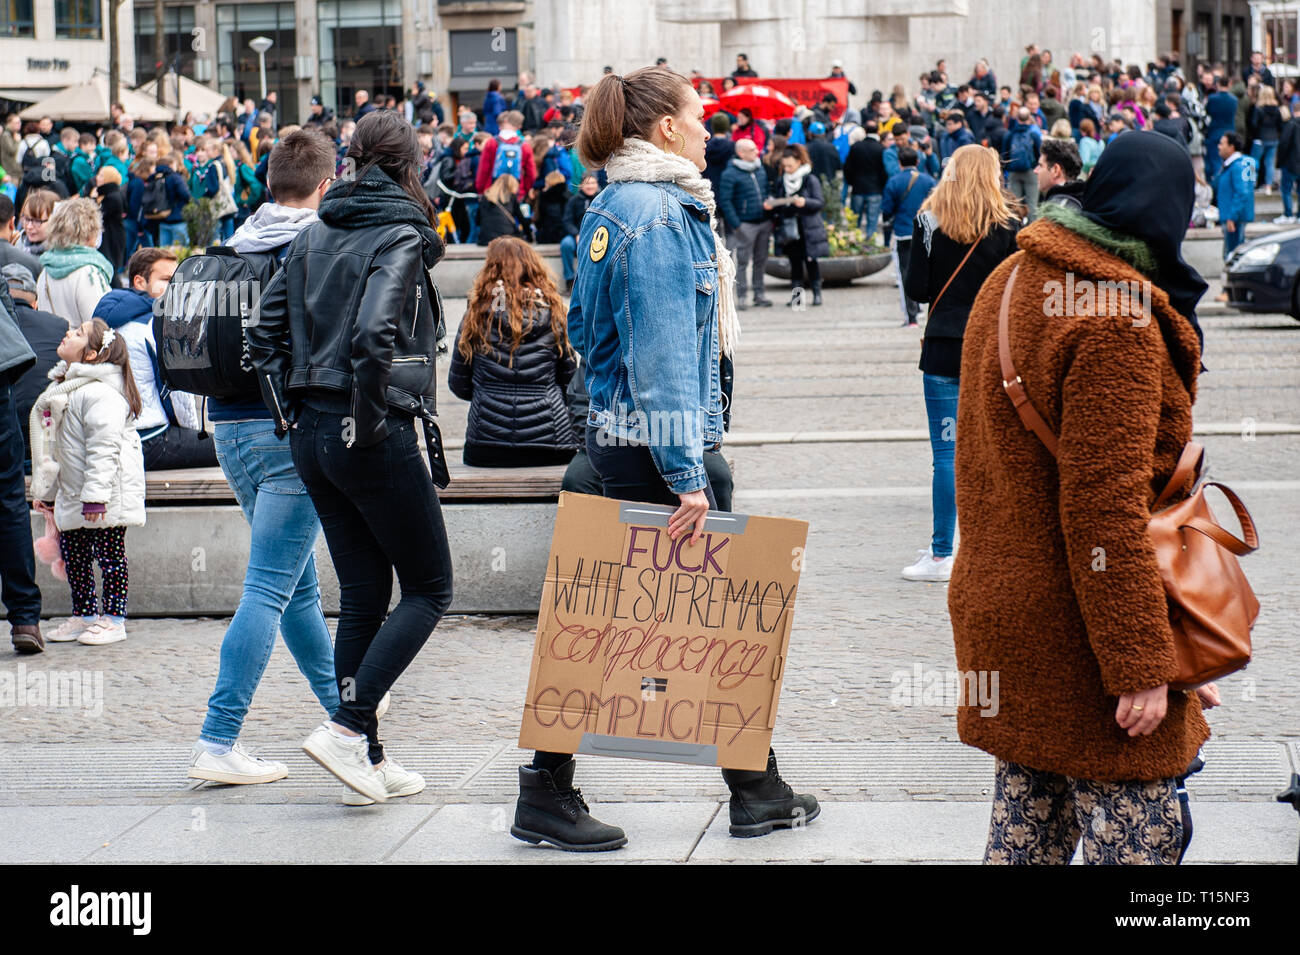 Amsterdam, North Holland, Netherlands. 23rd Mar, 2019. A woman is seen walking around the Dam square while holding a placard during the demonstration.Thousands of people gathered at the Dam square in the center of Amsterdam to demonstrate against racism and discrimination. They ask for diversity and solidarity, against all forms of racism and discrimination. Also, against the two political far-right parties in The Netherlands, the PVV and the FvD which have increased their power during the last elections in the country. A small far-right group showed up during the walk holding two big placa Stock Photo